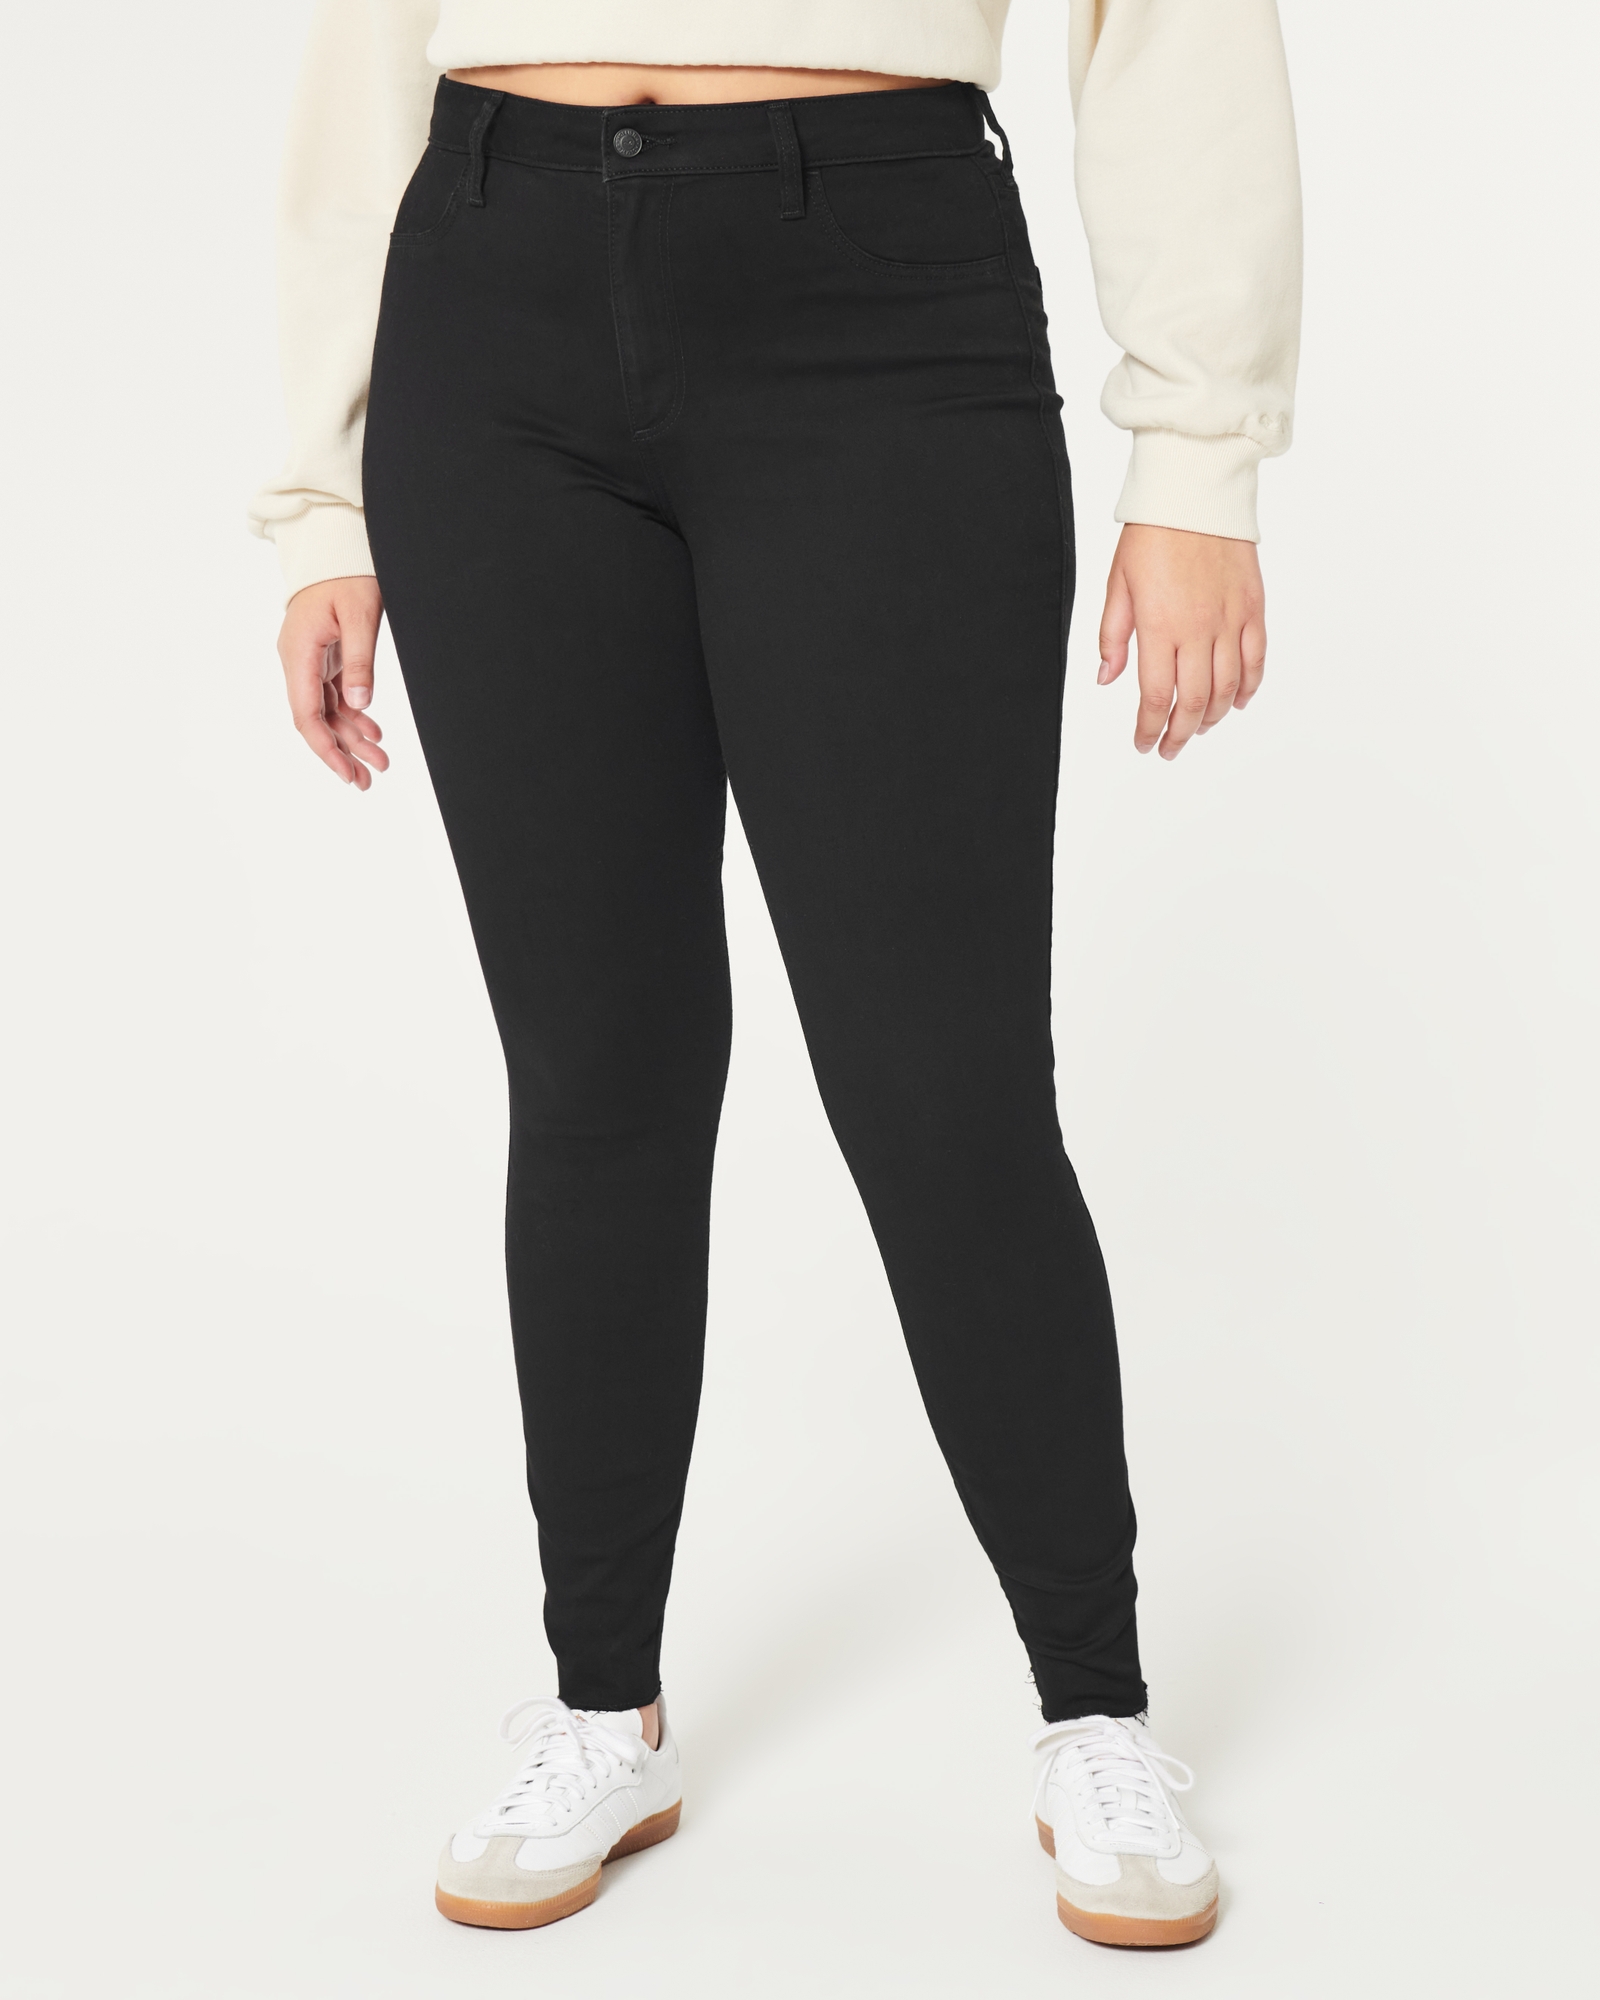 Hollister •• High Rise Jeggings Size 26 - $19 - From Emily